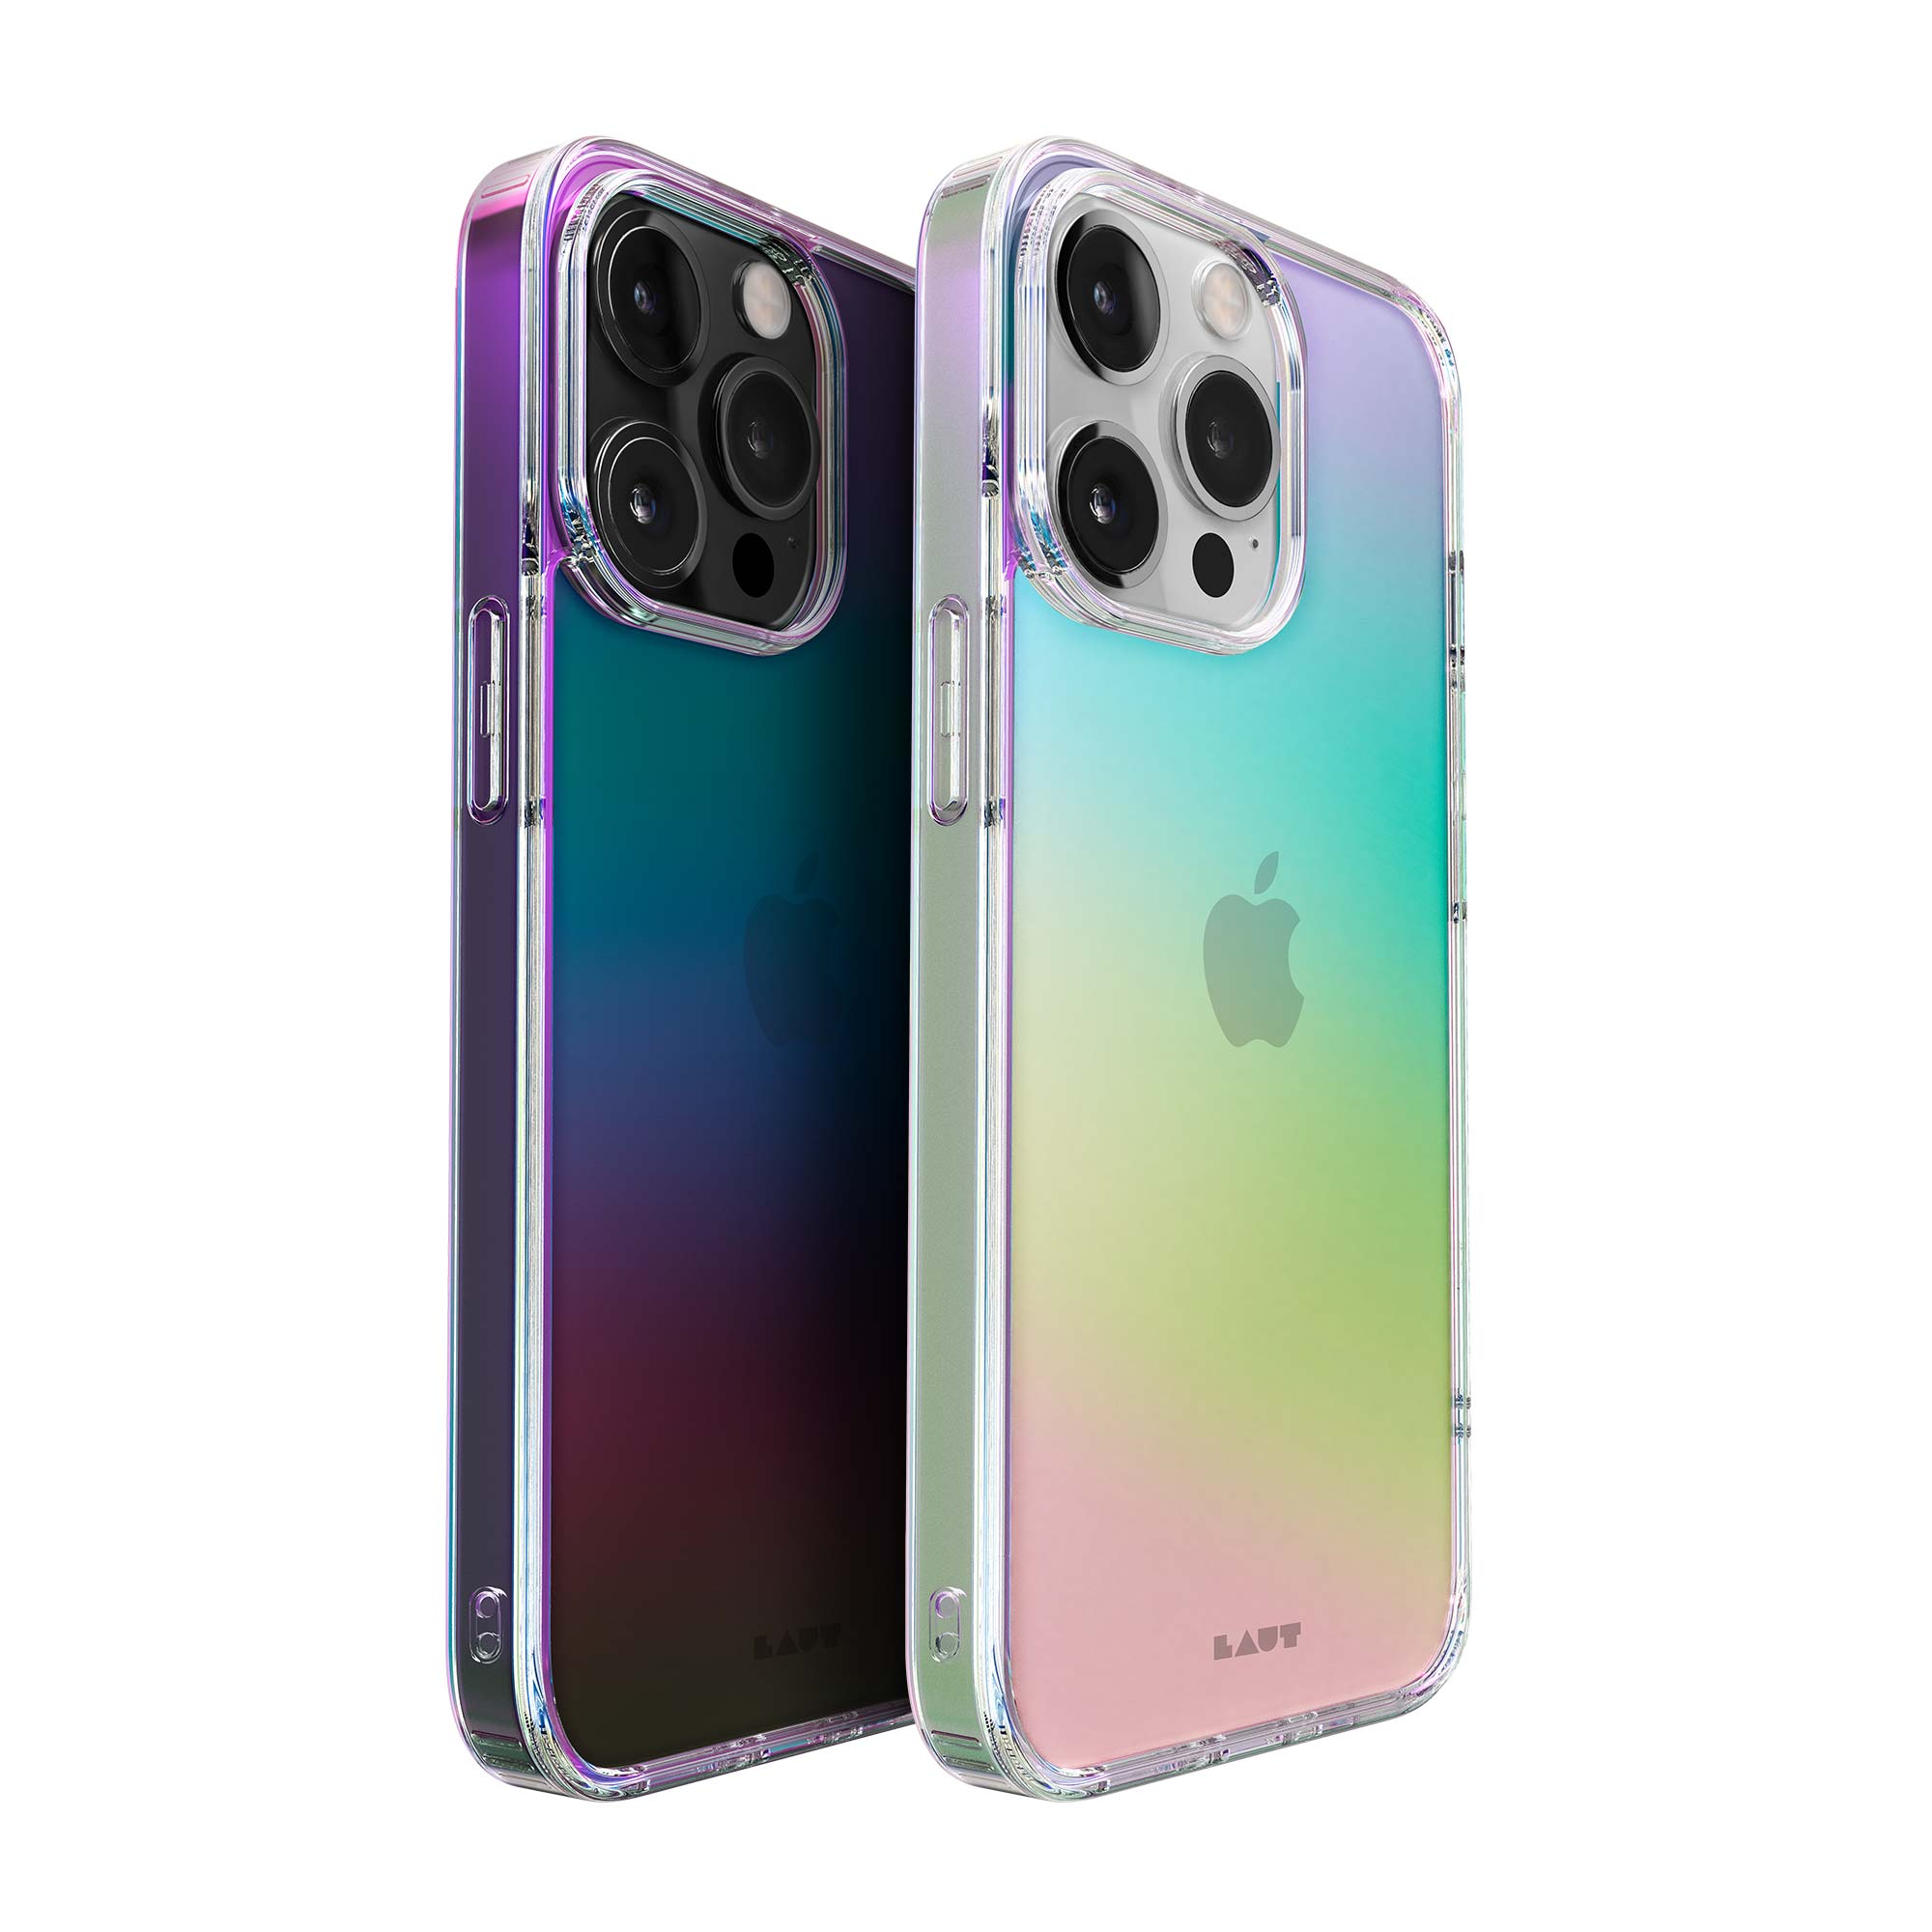 HOLO case for iPhone 14 Series